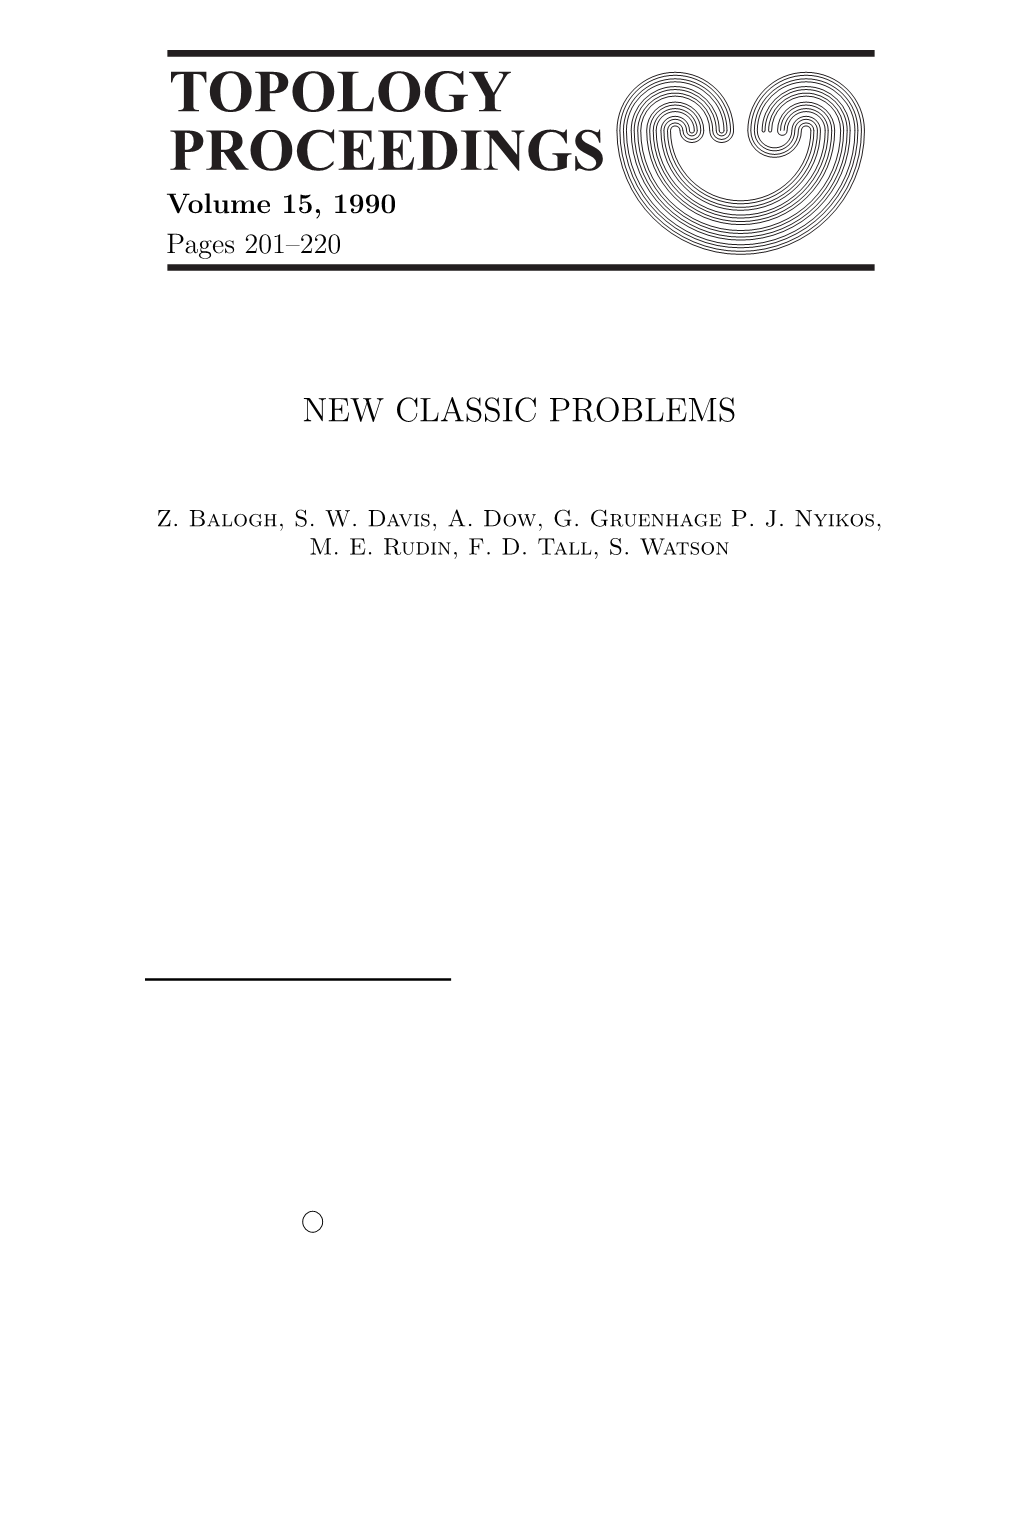 Topology Proceedings 15 (1990) Pp. 201-220: NEW CLASSIC PROBLEMS